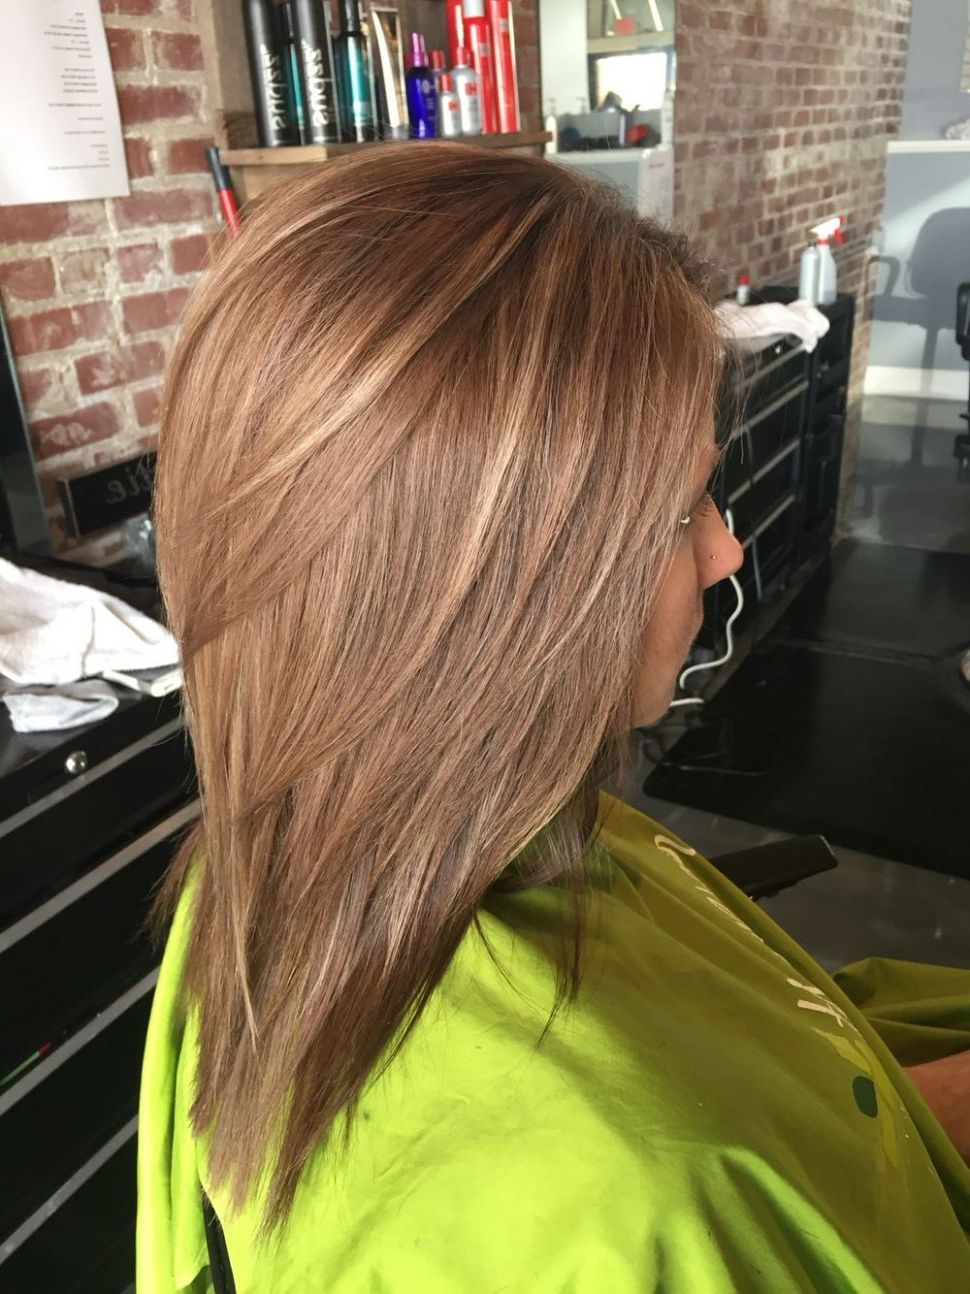 Hair Color : Brown Hair With Blonde Highlights Wig Light Bob Dark With Well Known Brown And Blonde Feathers Hairstyles (View 11 of 20)